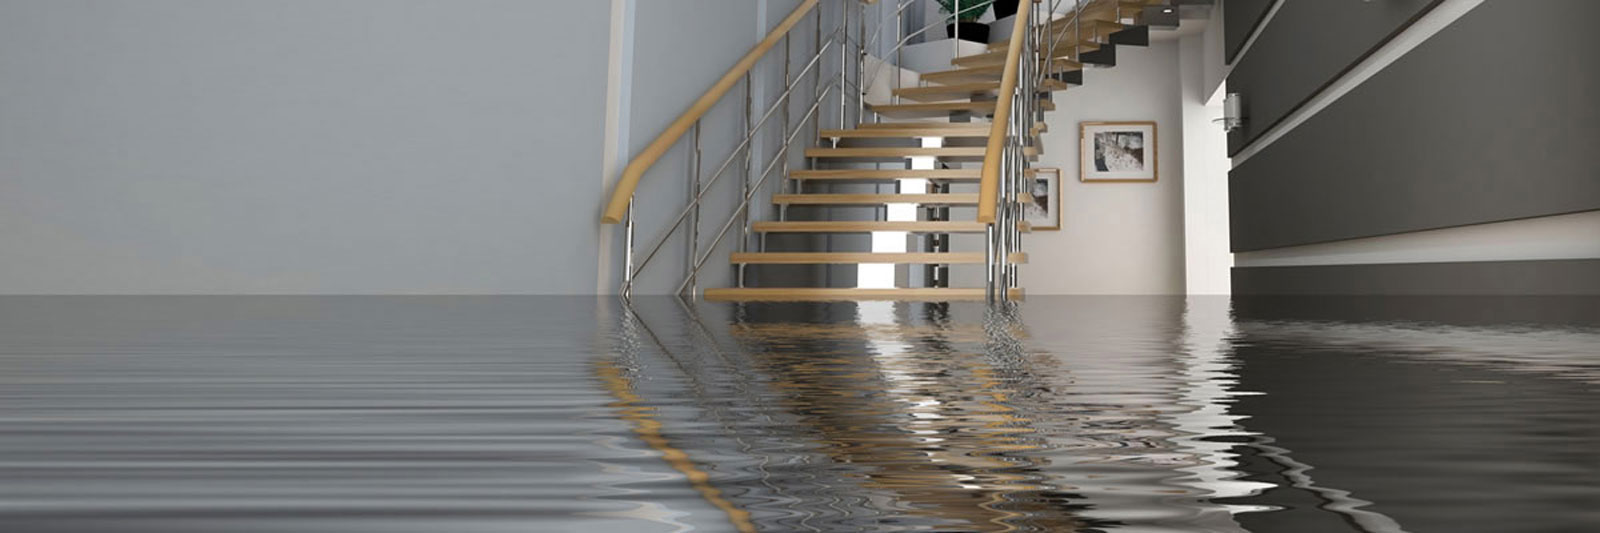 water damage carpet cleaning melbourne